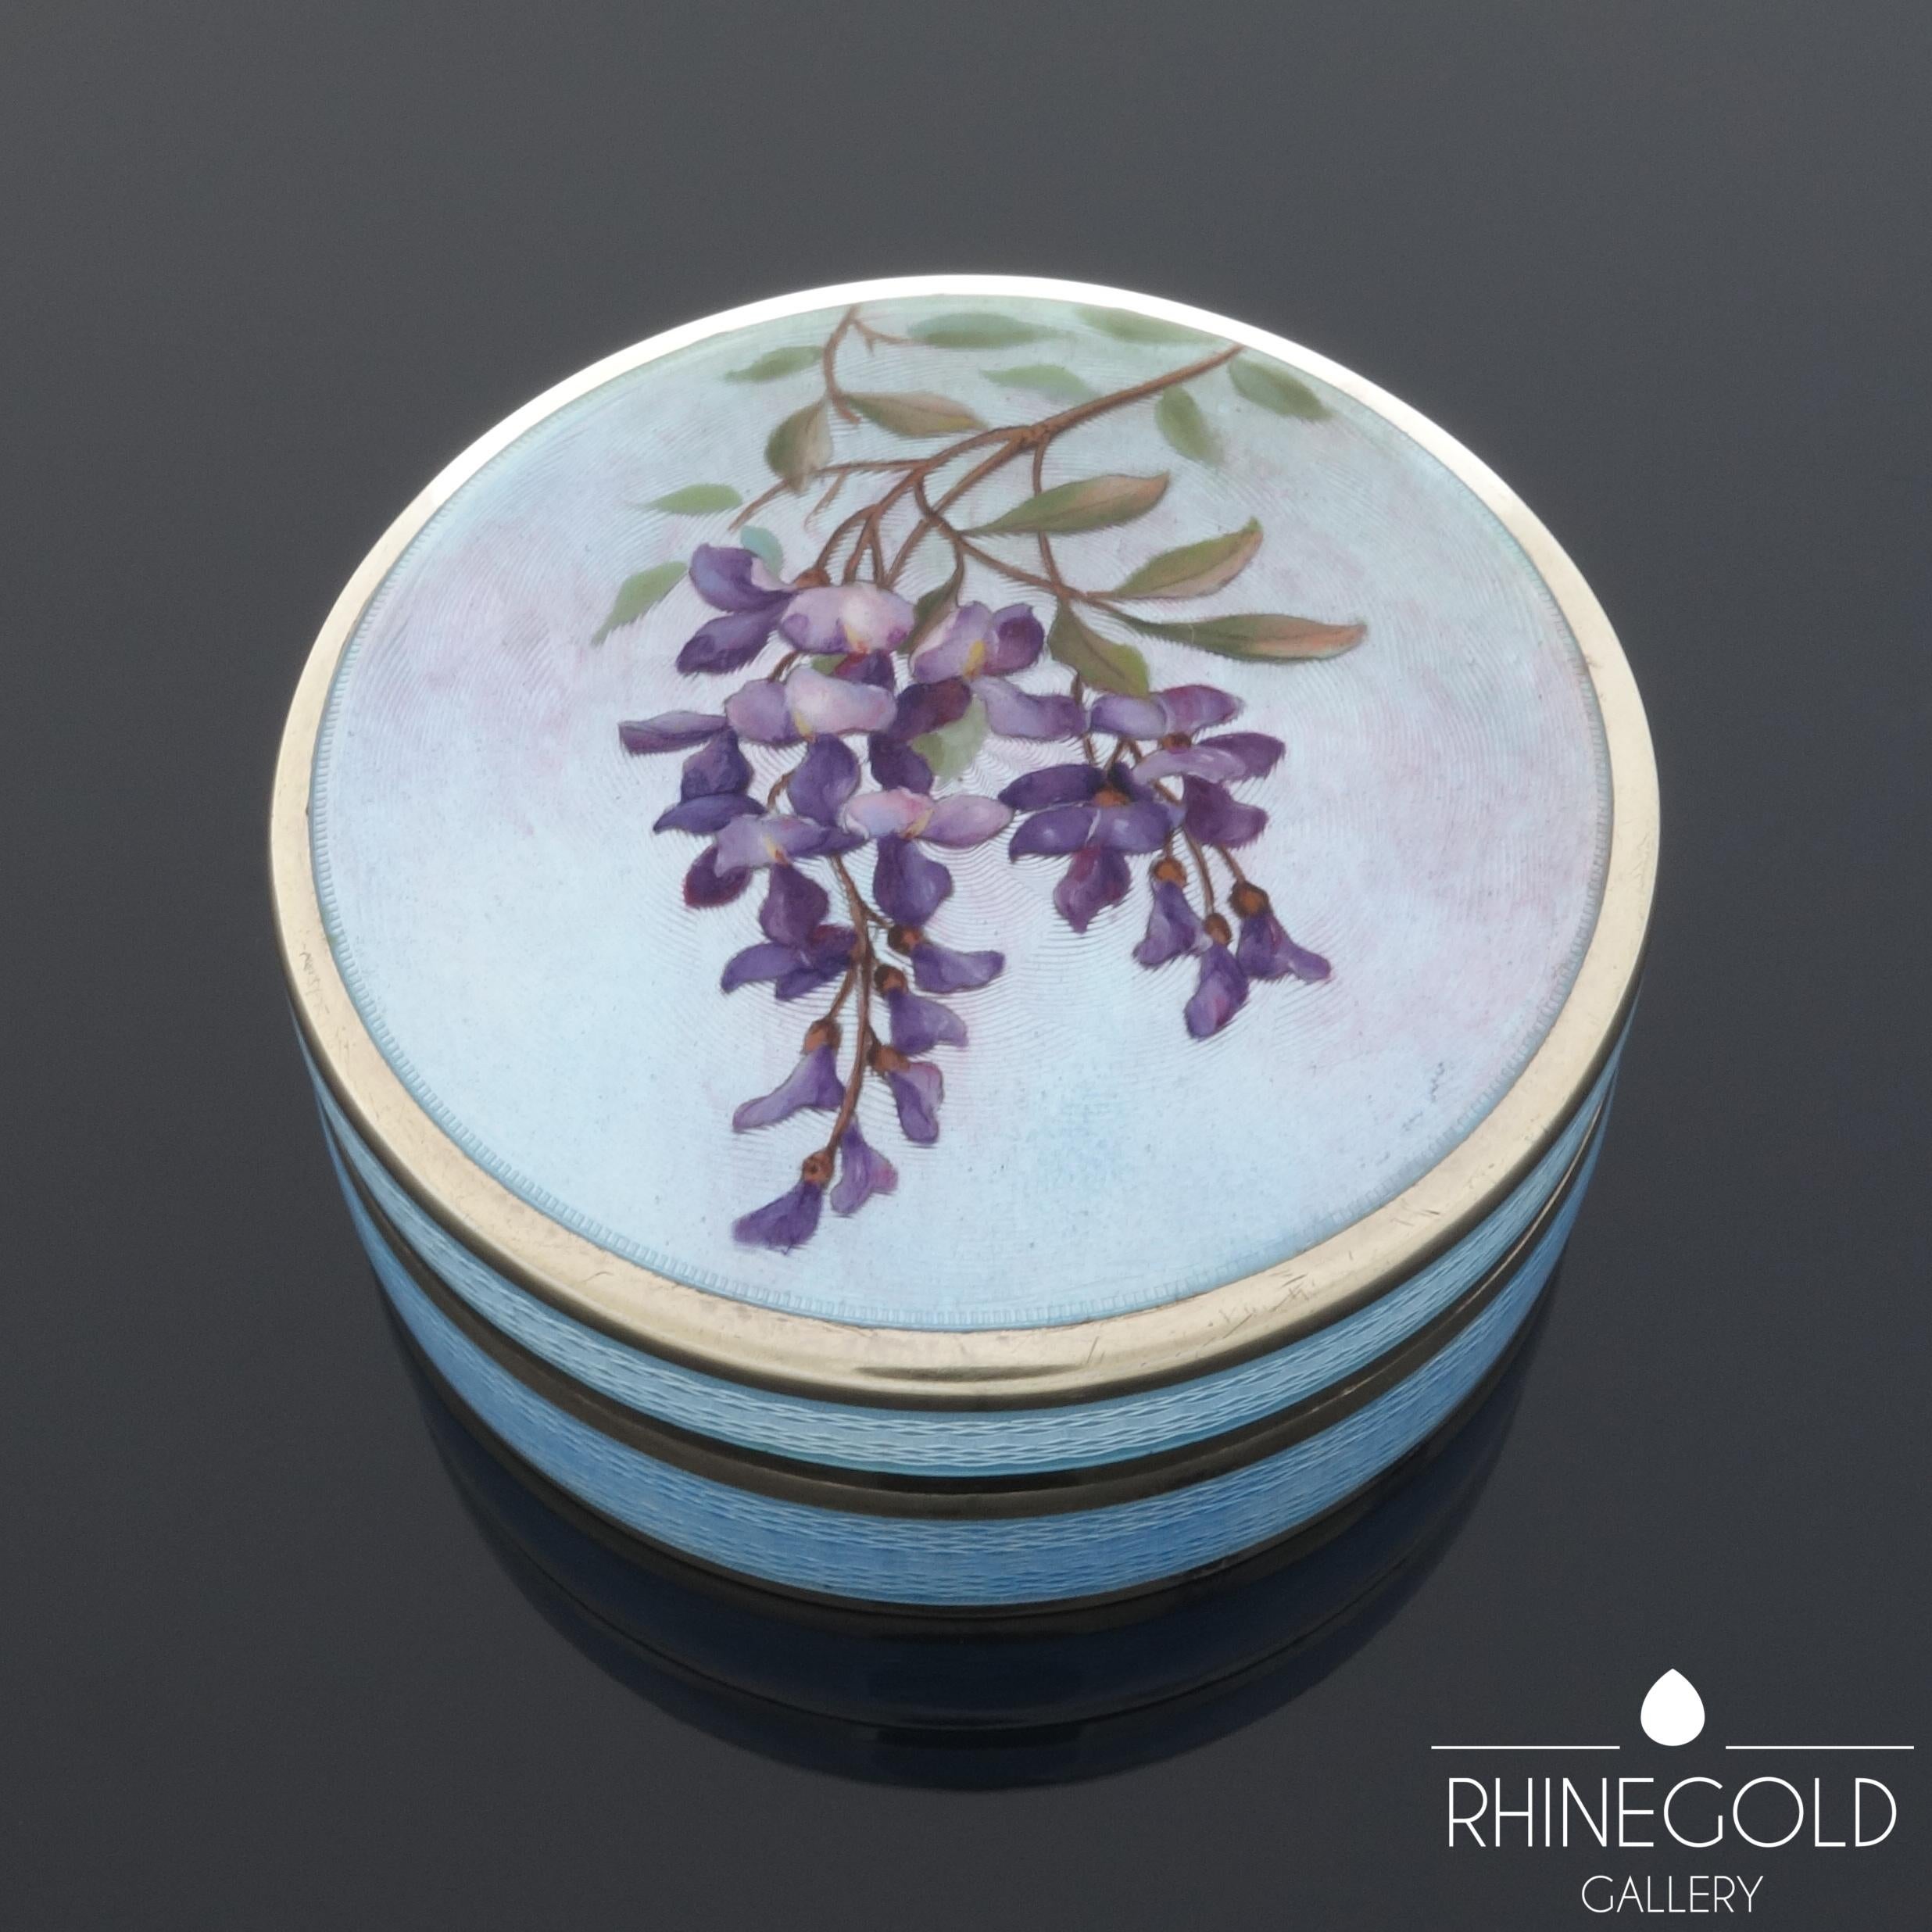 The quality in design and workmanship surpasses most enamel boxes of this type. The box is in undamaged condition:

Antique Art Nouveau Guilloche Enamel Silver Box with Wisteria Motif
Gilt 935 silver, guilloche enamel
Diameter 5.5 cm, height 2.2 cm